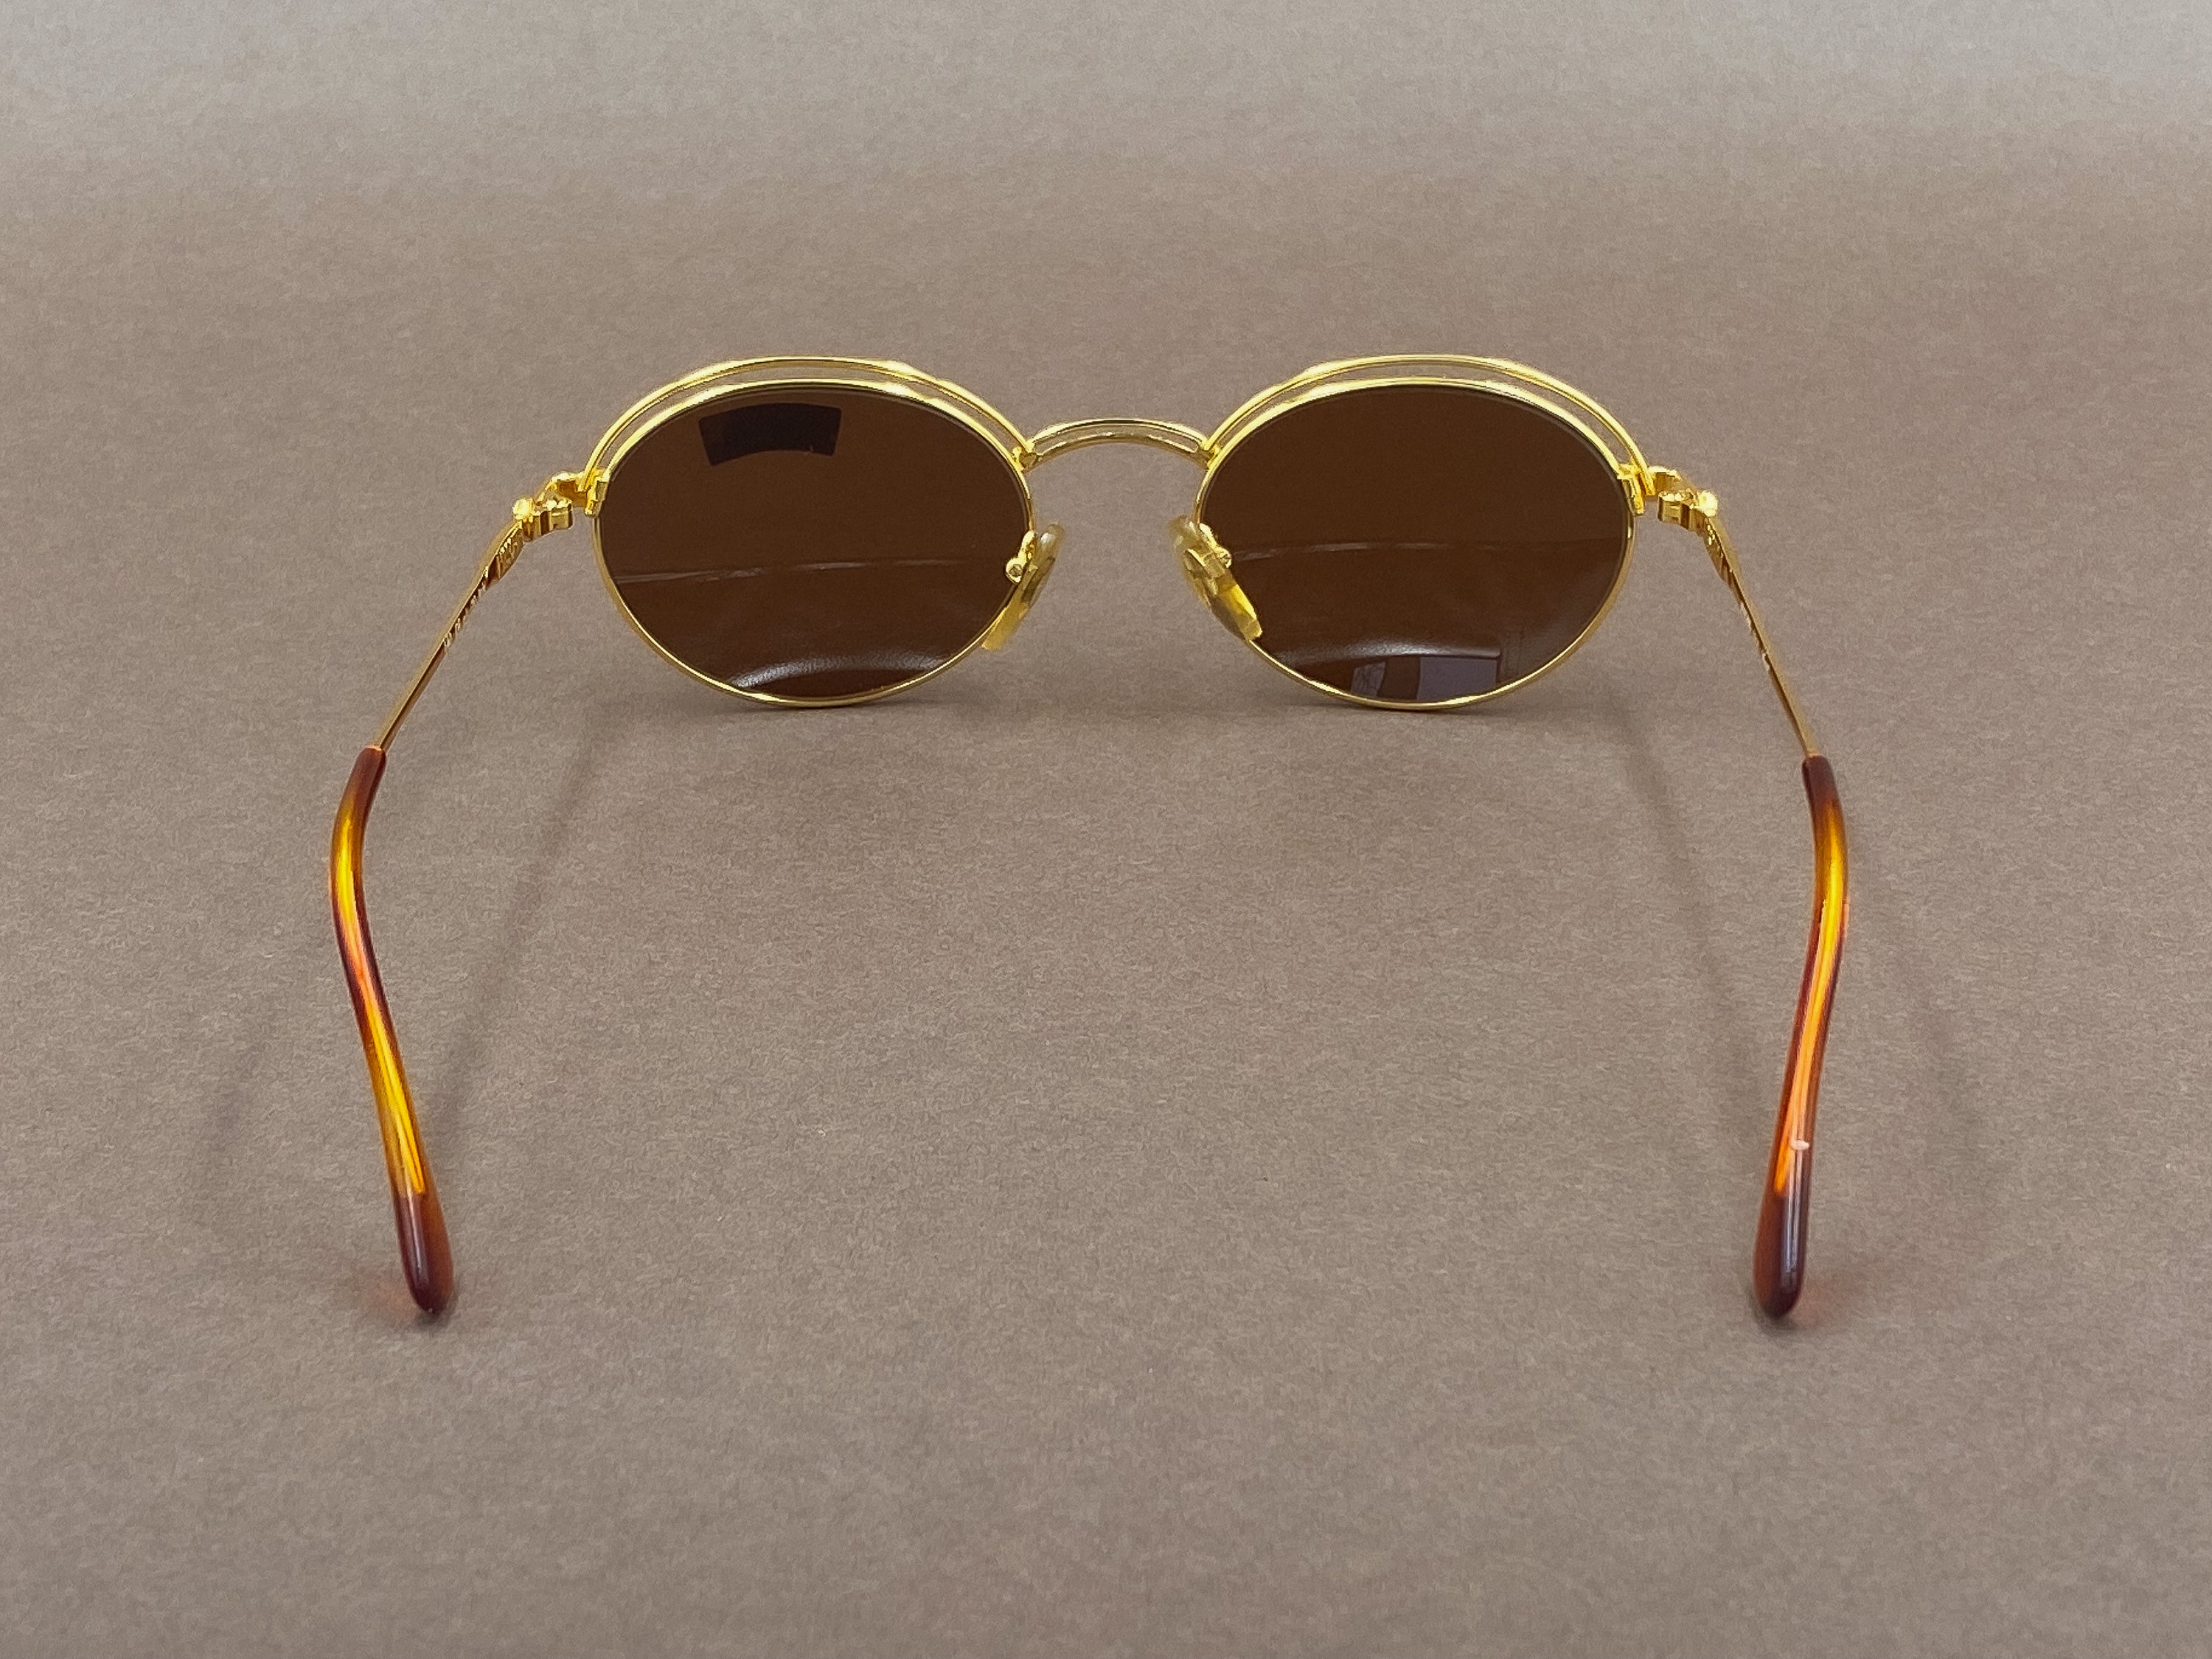 Moschino by Persol M44 sunglasses